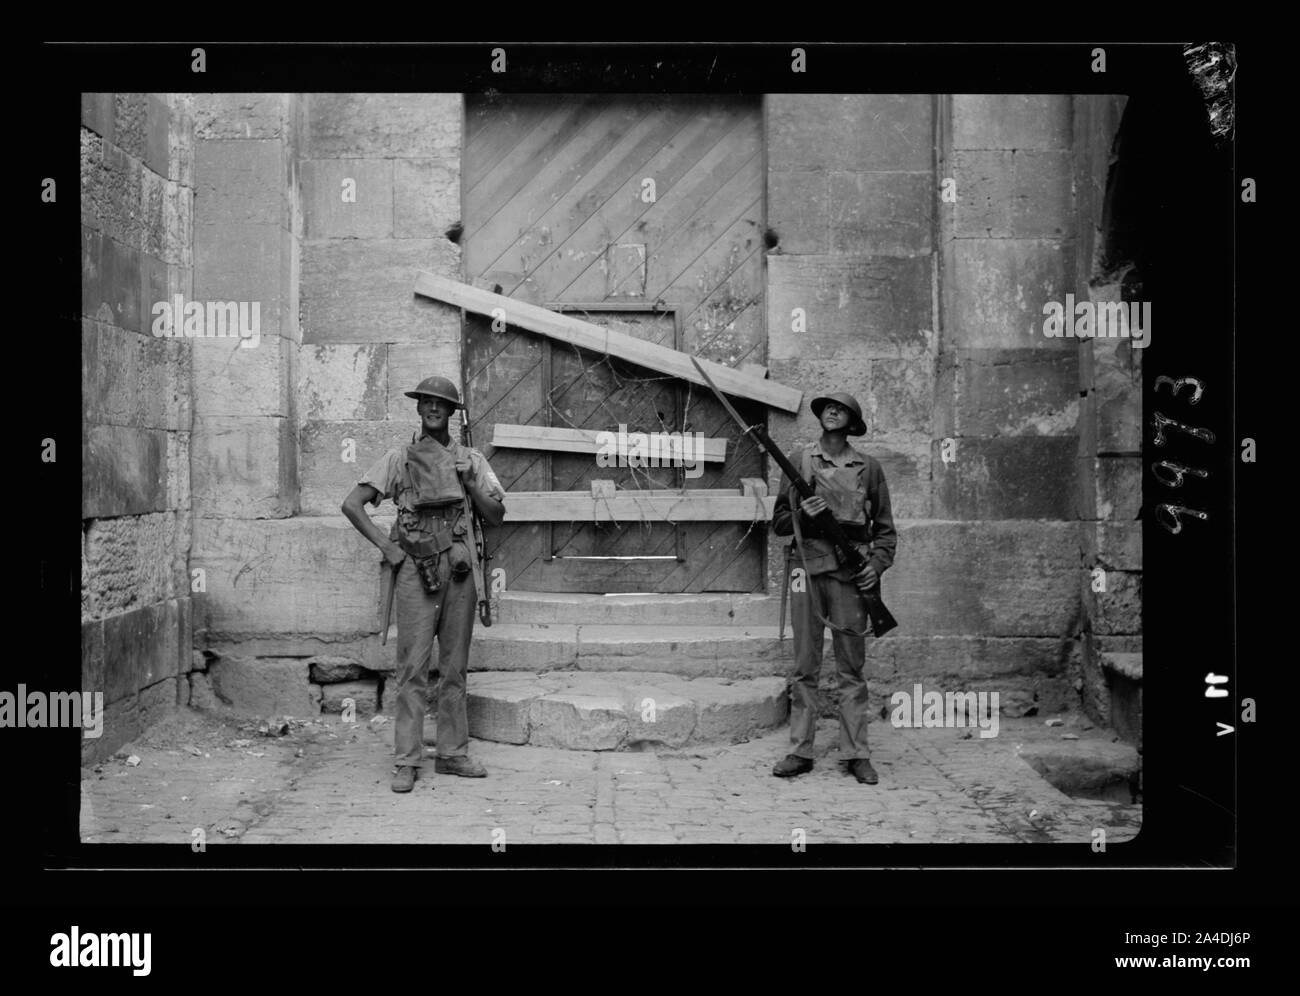 The raising of the siege of Jerusalem. Typical scene of troops in Old City before the lifting of curfew, an entrance into the Temple Area closed with timbers & barbed wire & guarded by troops Stock Photo